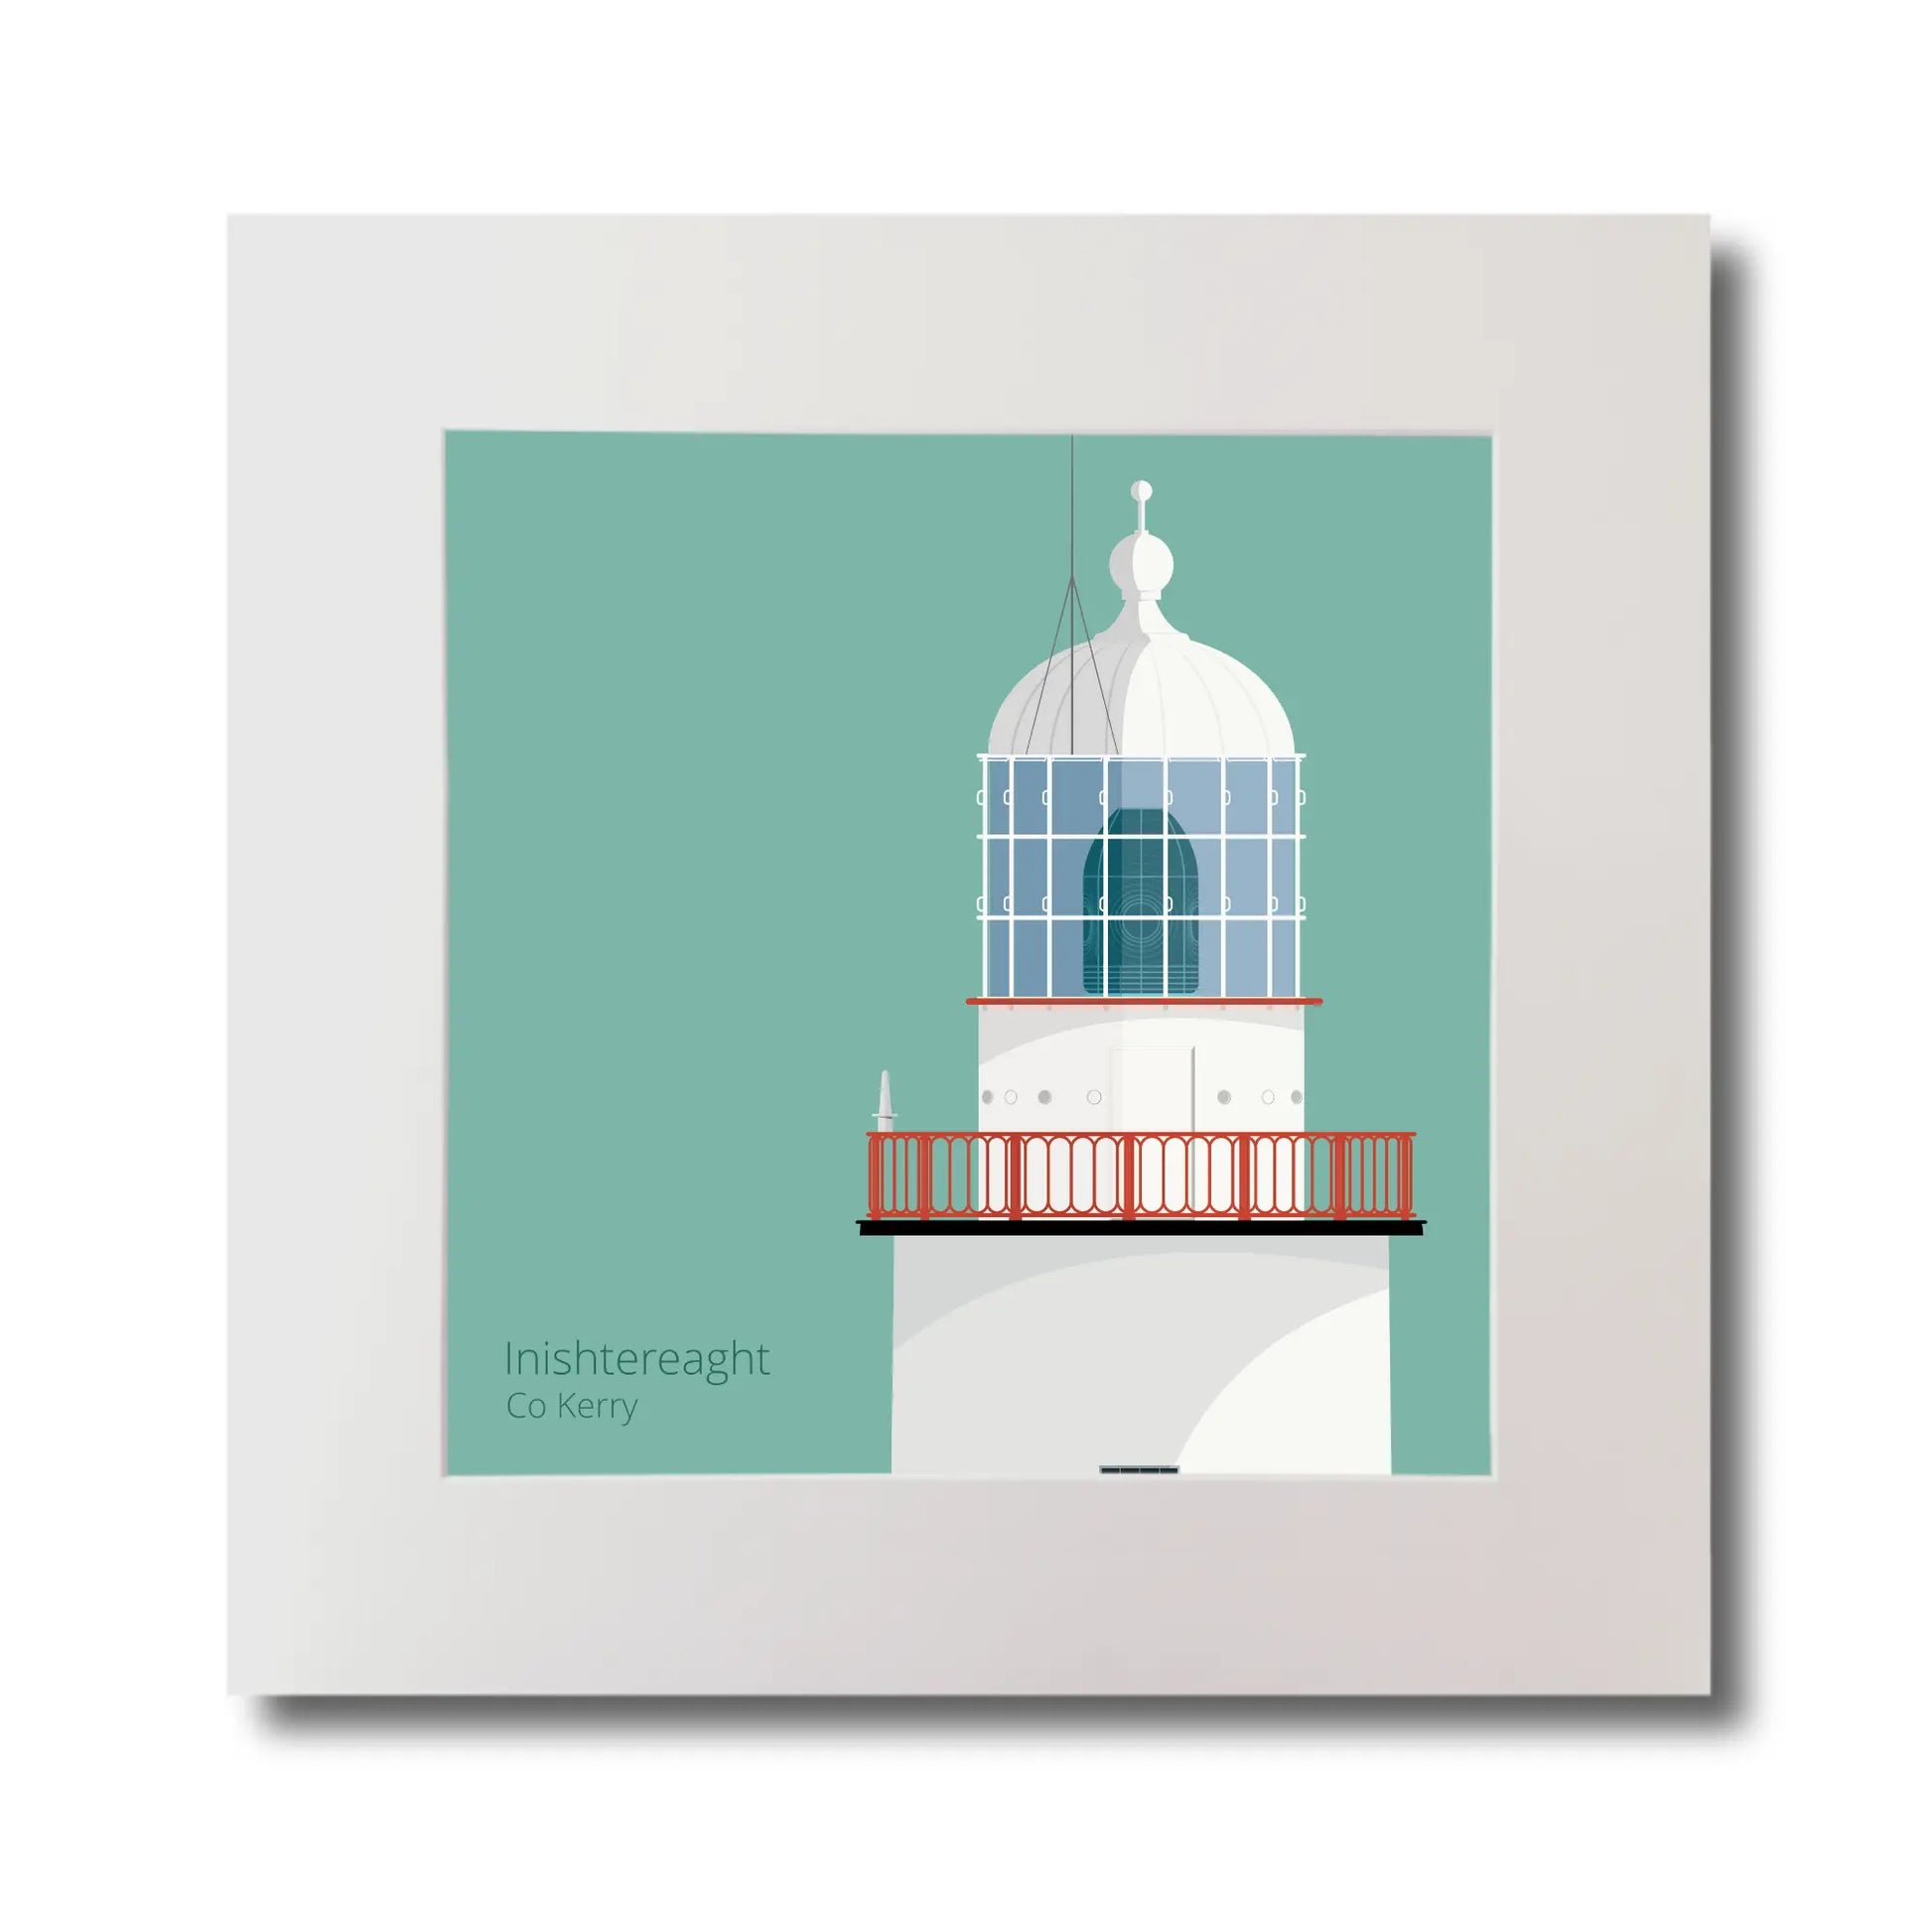 Illustration of Inistearaght lighthouse on an ocean green background, mounted and measuring 30x30cm.